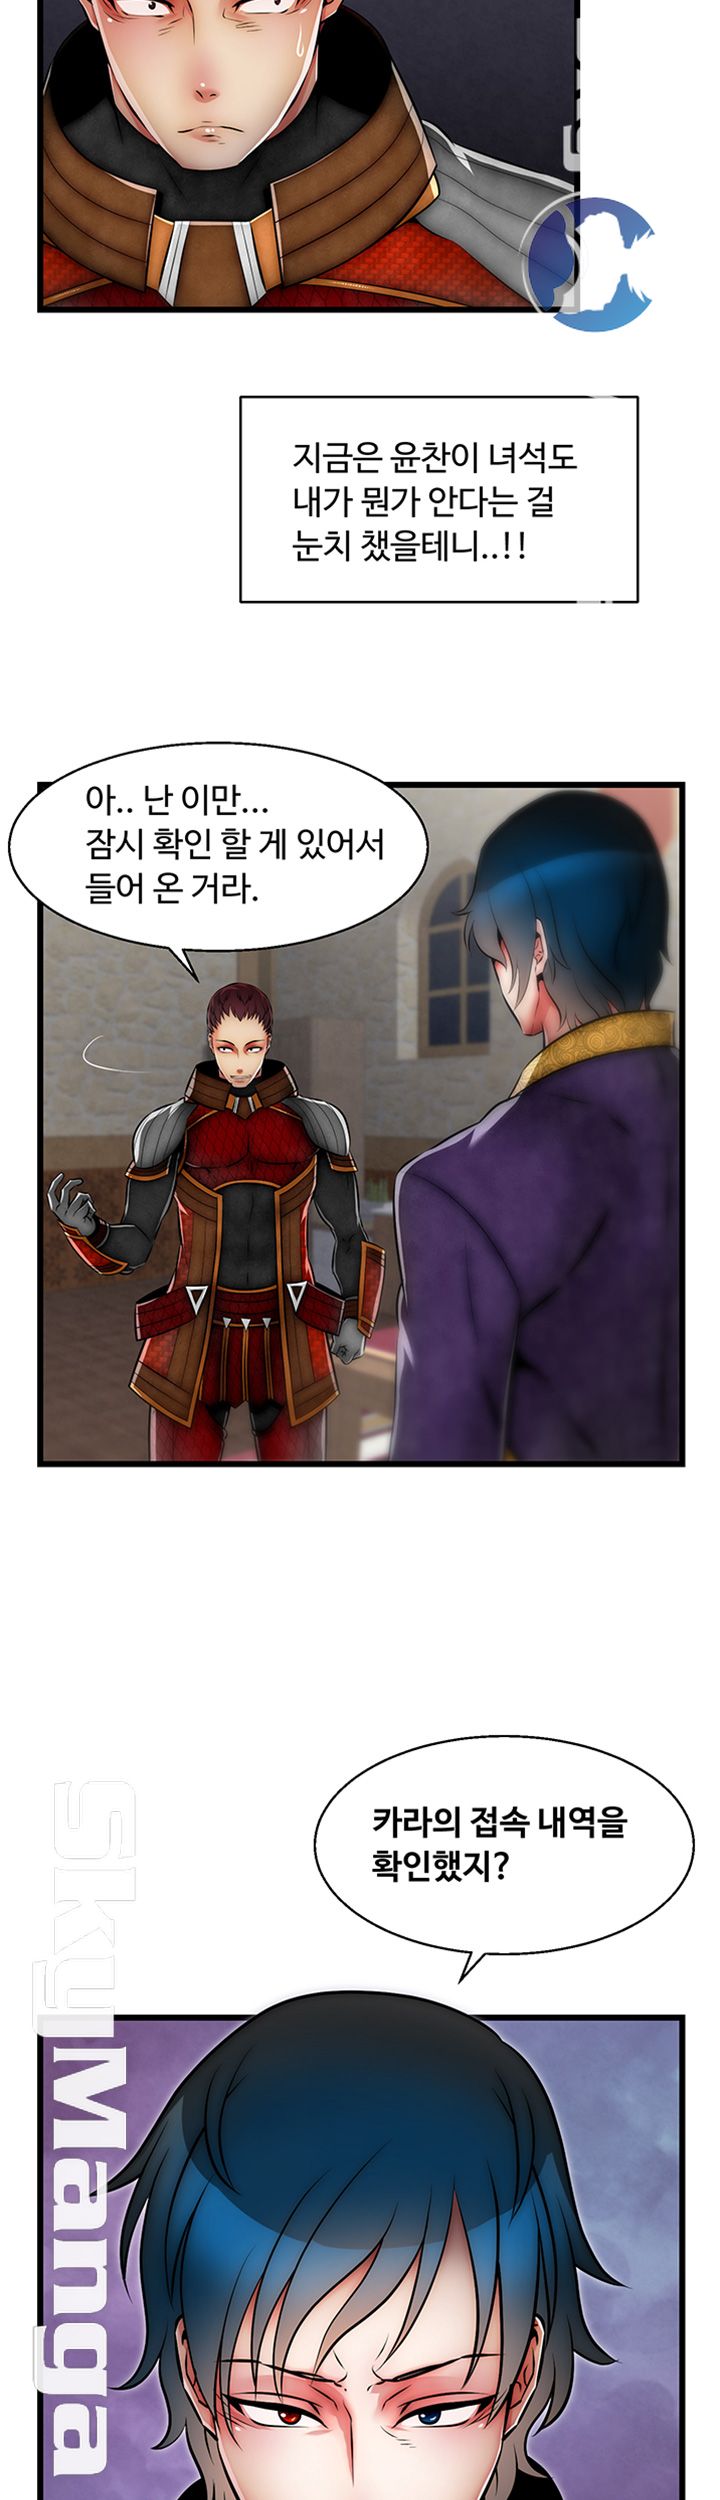 Ssappossible Elf RAW - Chapter 23 Page 3